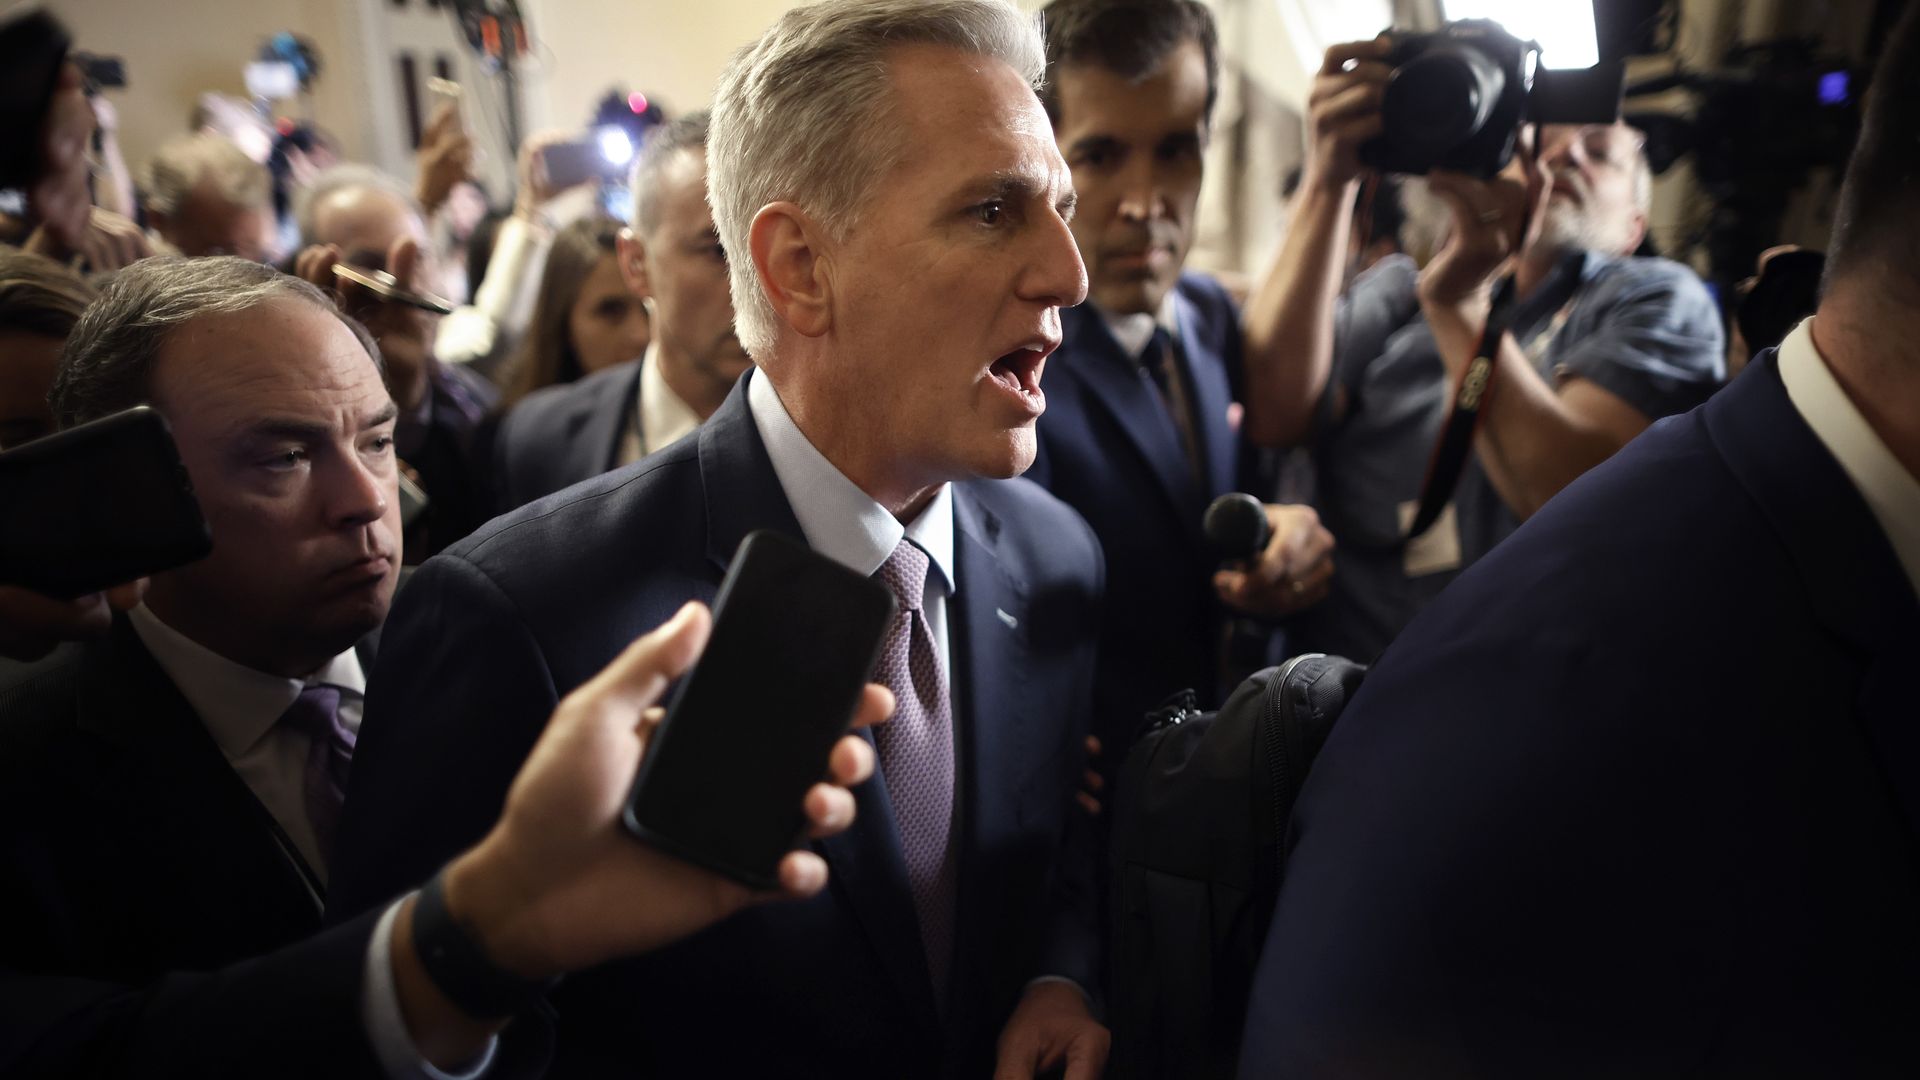 Kevin McCarthy is out as speaker of the House. What happens next